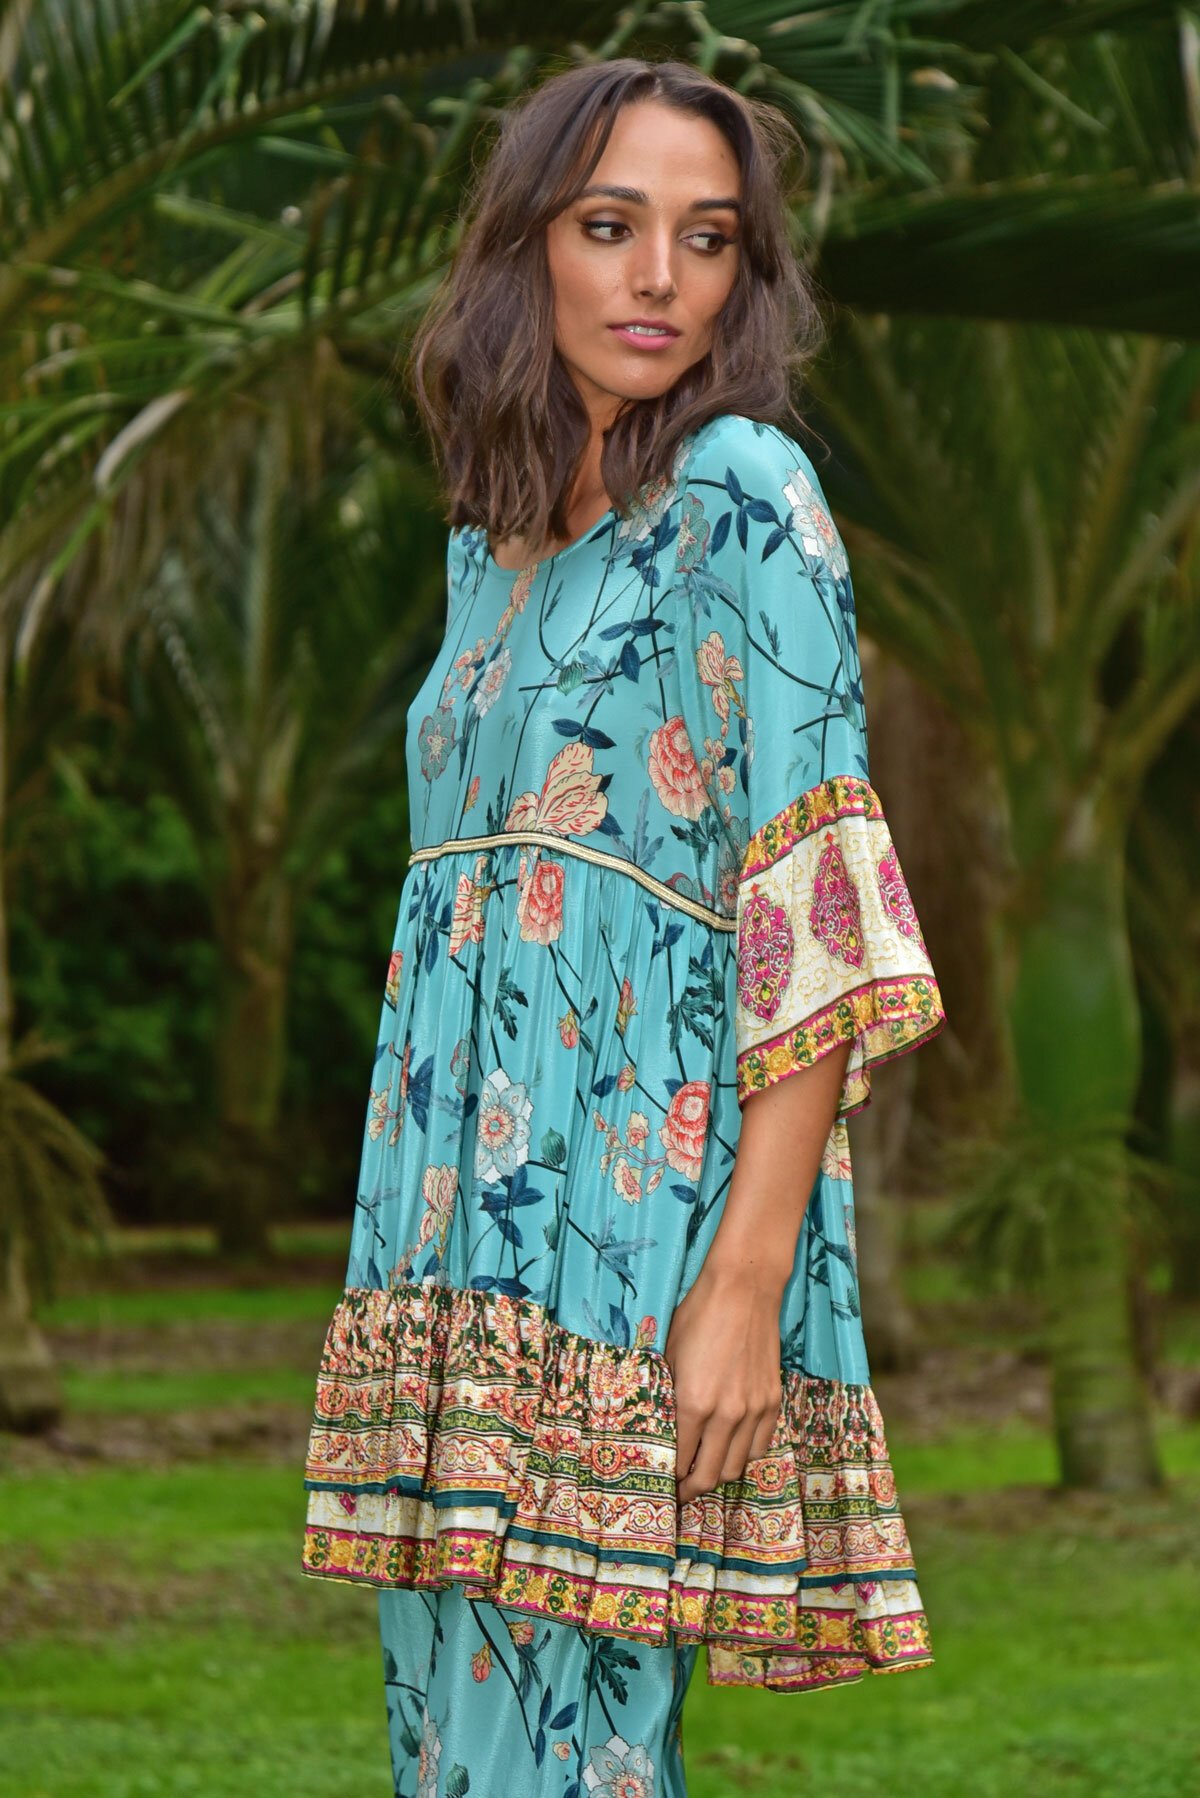 BABY DOLL BLISS Top - Curate : Trelise Cooper Online - WILD BLUE YONDER ...